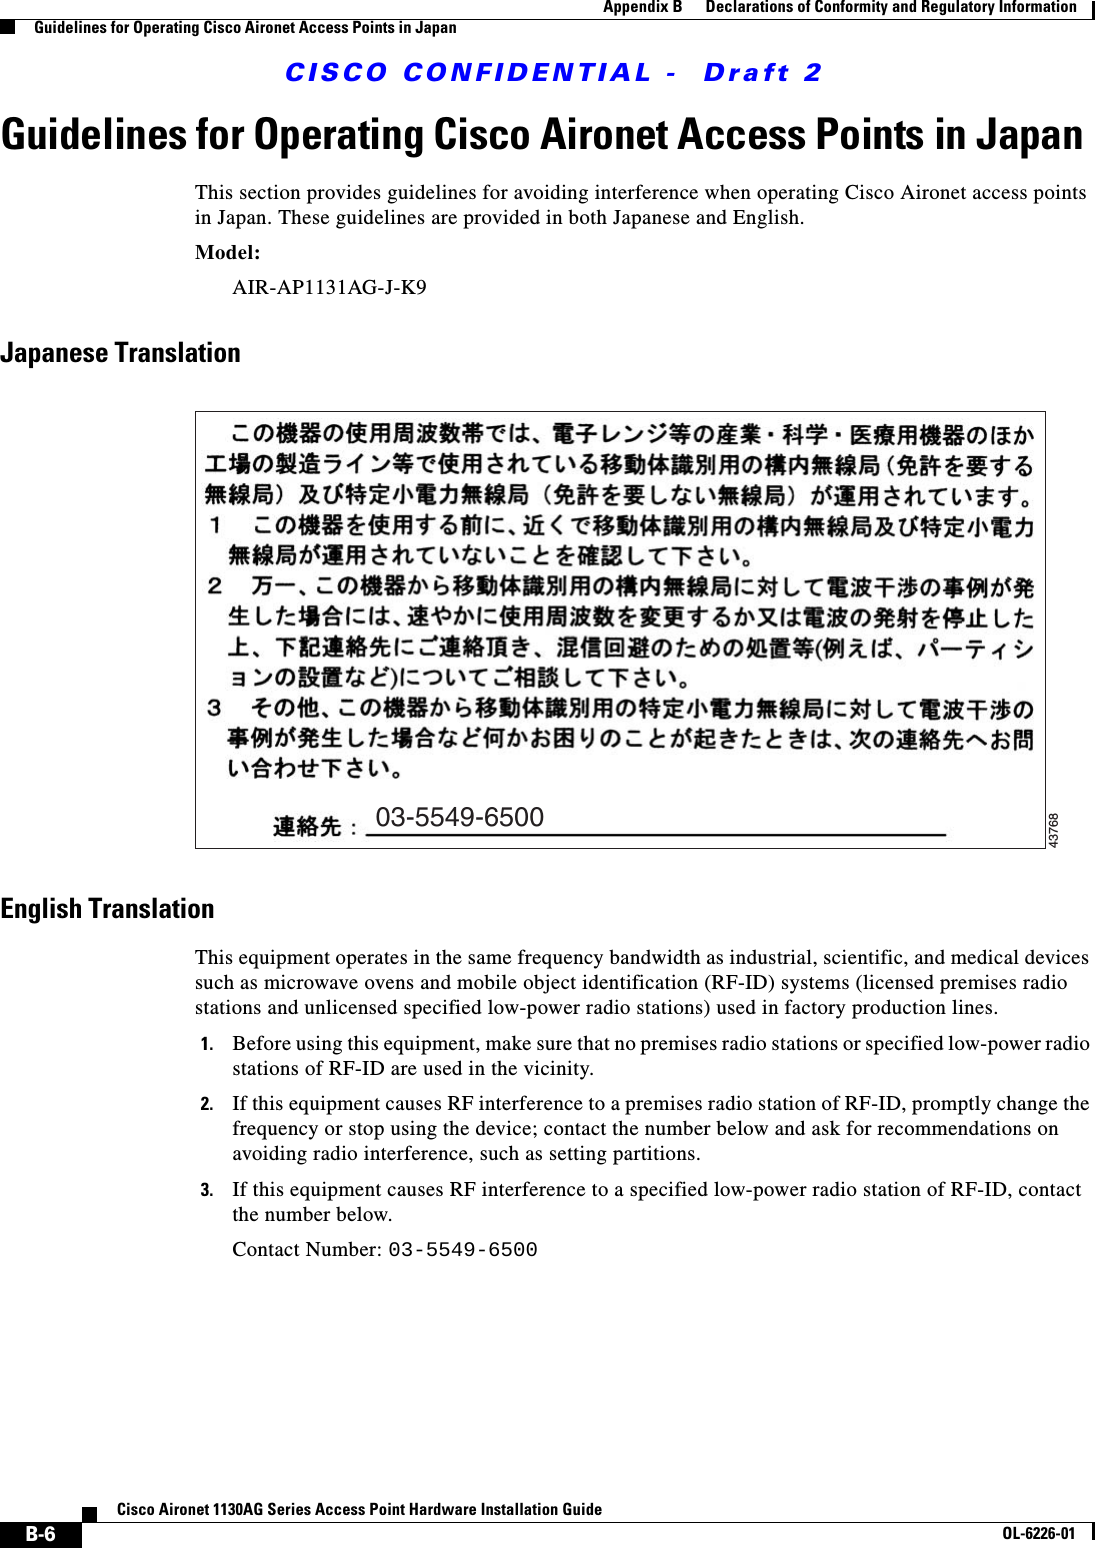  CISCO CONFIDENTIAL -  Draft 2B-6Cisco Aironet 1130AG Series Access Point Hardware Installation GuideOL-6226-01Appendix B      Declarations of Conformity and Regulatory InformationGuidelines for Operating Cisco Aironet Access Points in JapanGuidelines for Operating Cisco Aironet Access Points in JapanThis section provides guidelines for avoiding interference when operating Cisco Aironet access points in Japan. These guidelines are provided in both Japanese and English.Model:AIR-AP1131AG-J-K9 Japanese TranslationEnglish TranslationThis equipment operates in the same frequency bandwidth as industrial, scientific, and medical devices such as microwave ovens and mobile object identification (RF-ID) systems (licensed premises radio stations and unlicensed specified low-power radio stations) used in factory production lines.1. Before using this equipment, make sure that no premises radio stations or specified low-power radio stations of RF-ID are used in the vicinity.2. If this equipment causes RF interference to a premises radio station of RF-ID, promptly change the frequency or stop using the device; contact the number below and ask for recommendations on avoiding radio interference, such as setting partitions.3. If this equipment causes RF interference to a specified low-power radio station of RF-ID, contact the number below.Contact Number: 03-5549-650003-5549-650043768